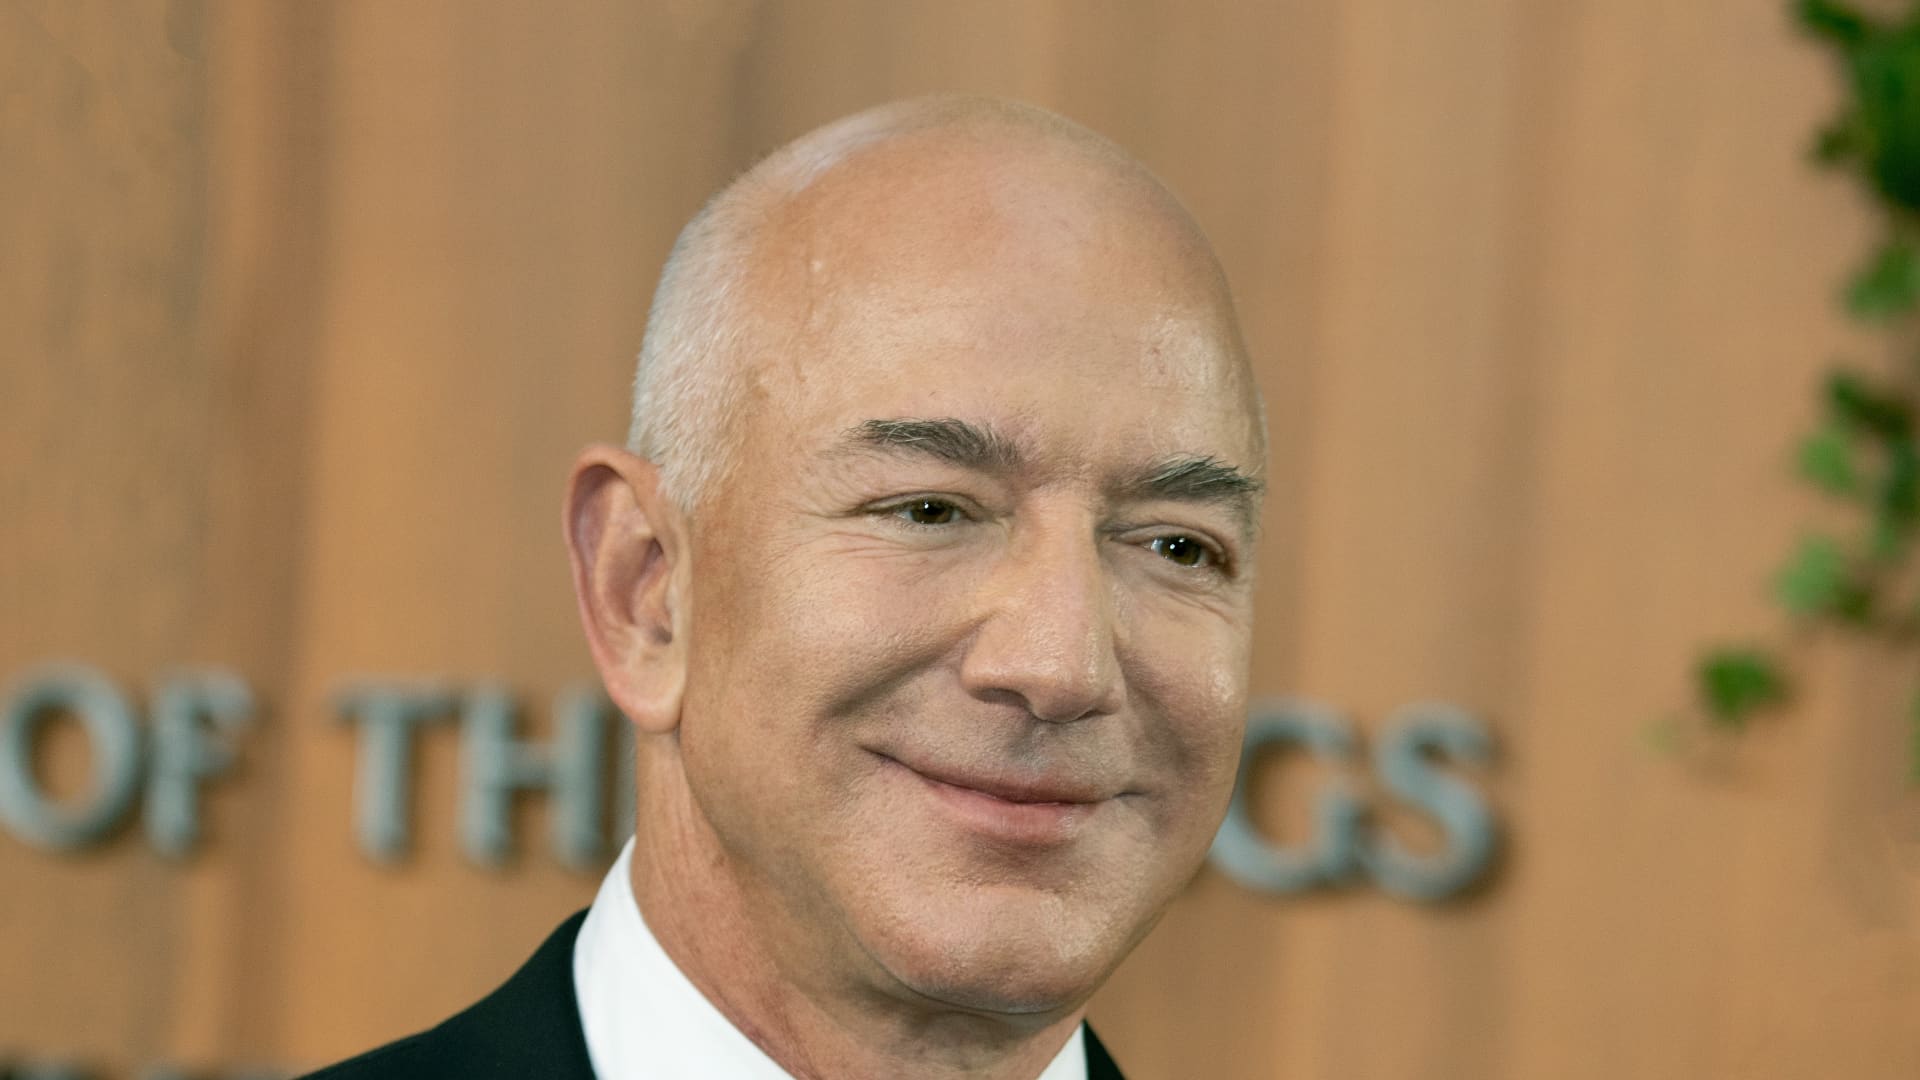 Why Jeff Bezos morning routine includes scrolling, dragging his feet [Video]